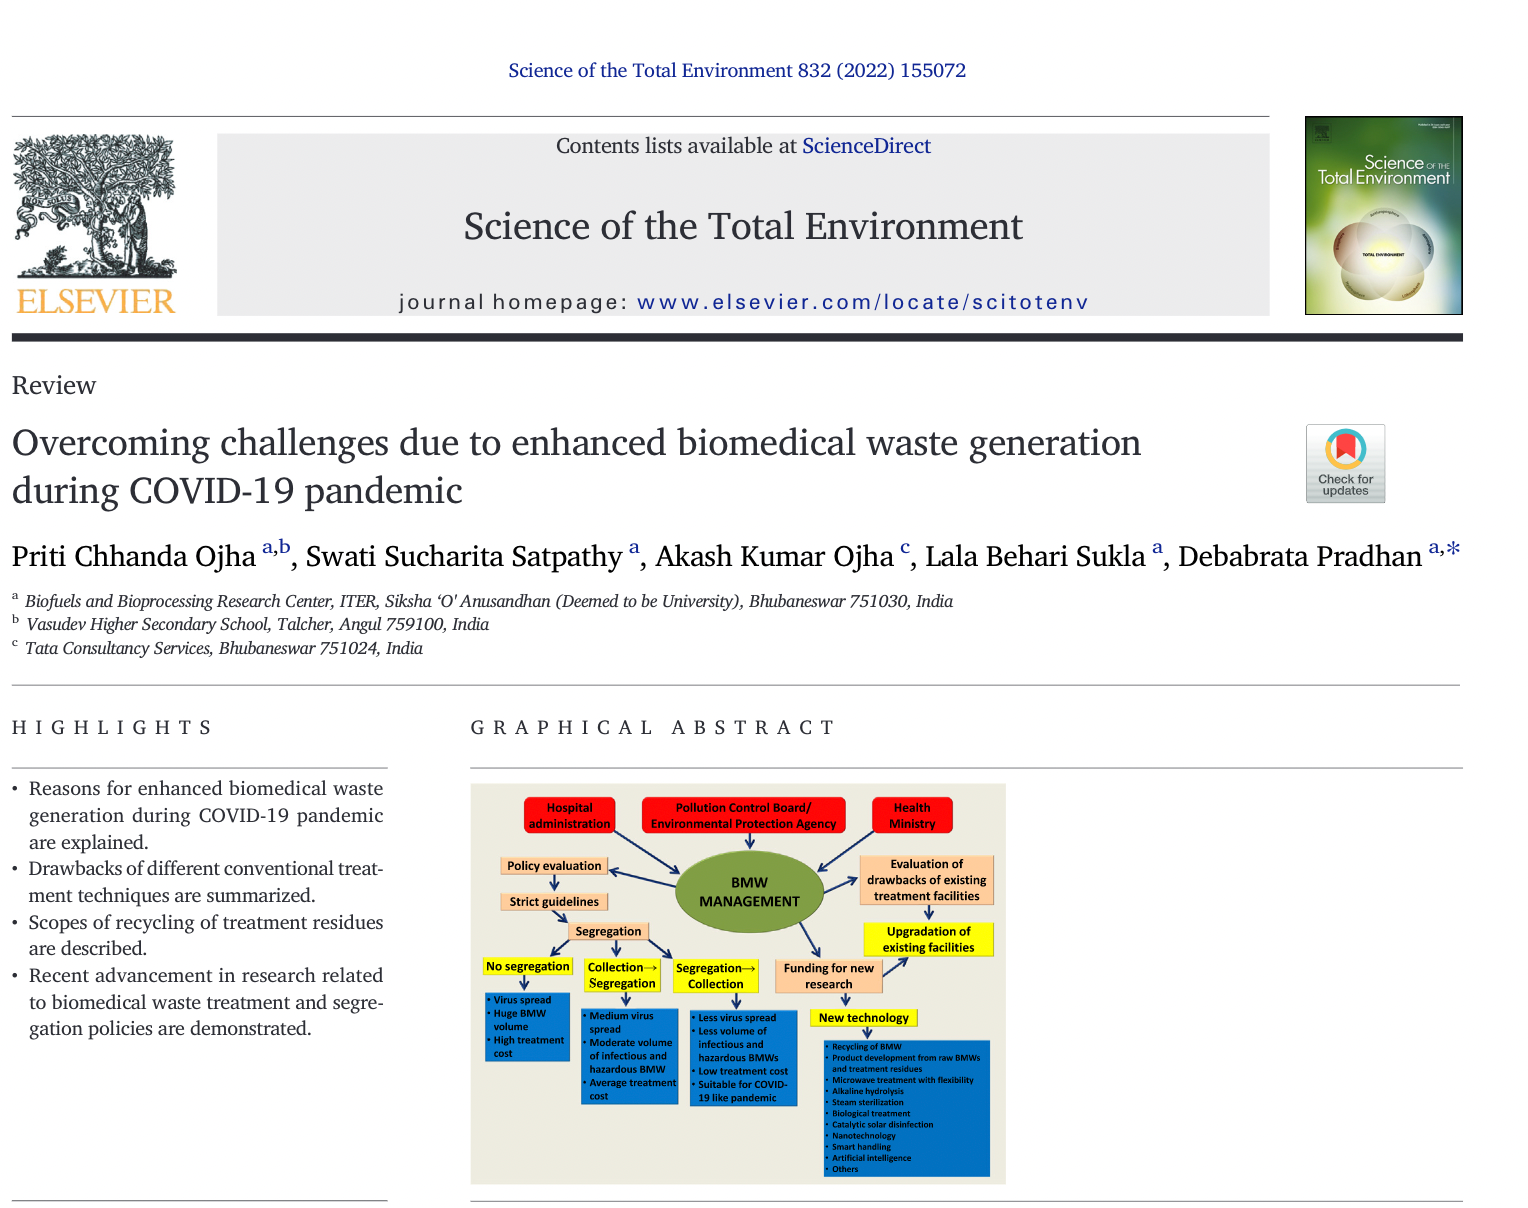 Review Overcoming challenges due to enhanced biomedical waste generation during COVID-19 pandemic